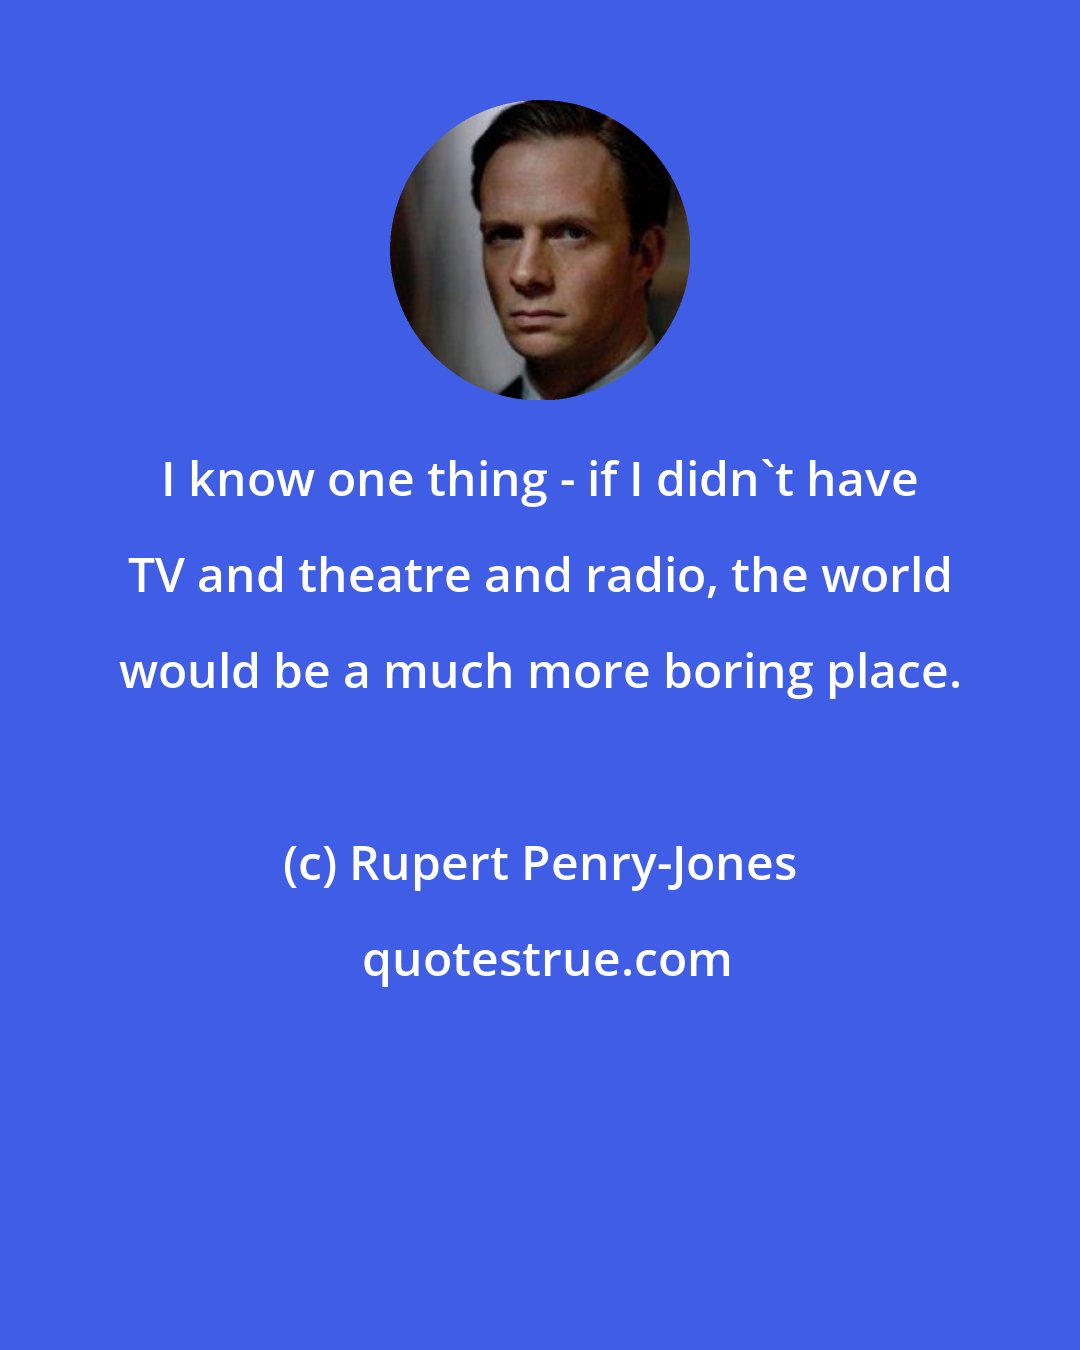 Rupert Penry-Jones: I know one thing - if I didn't have TV and theatre and radio, the world would be a much more boring place.